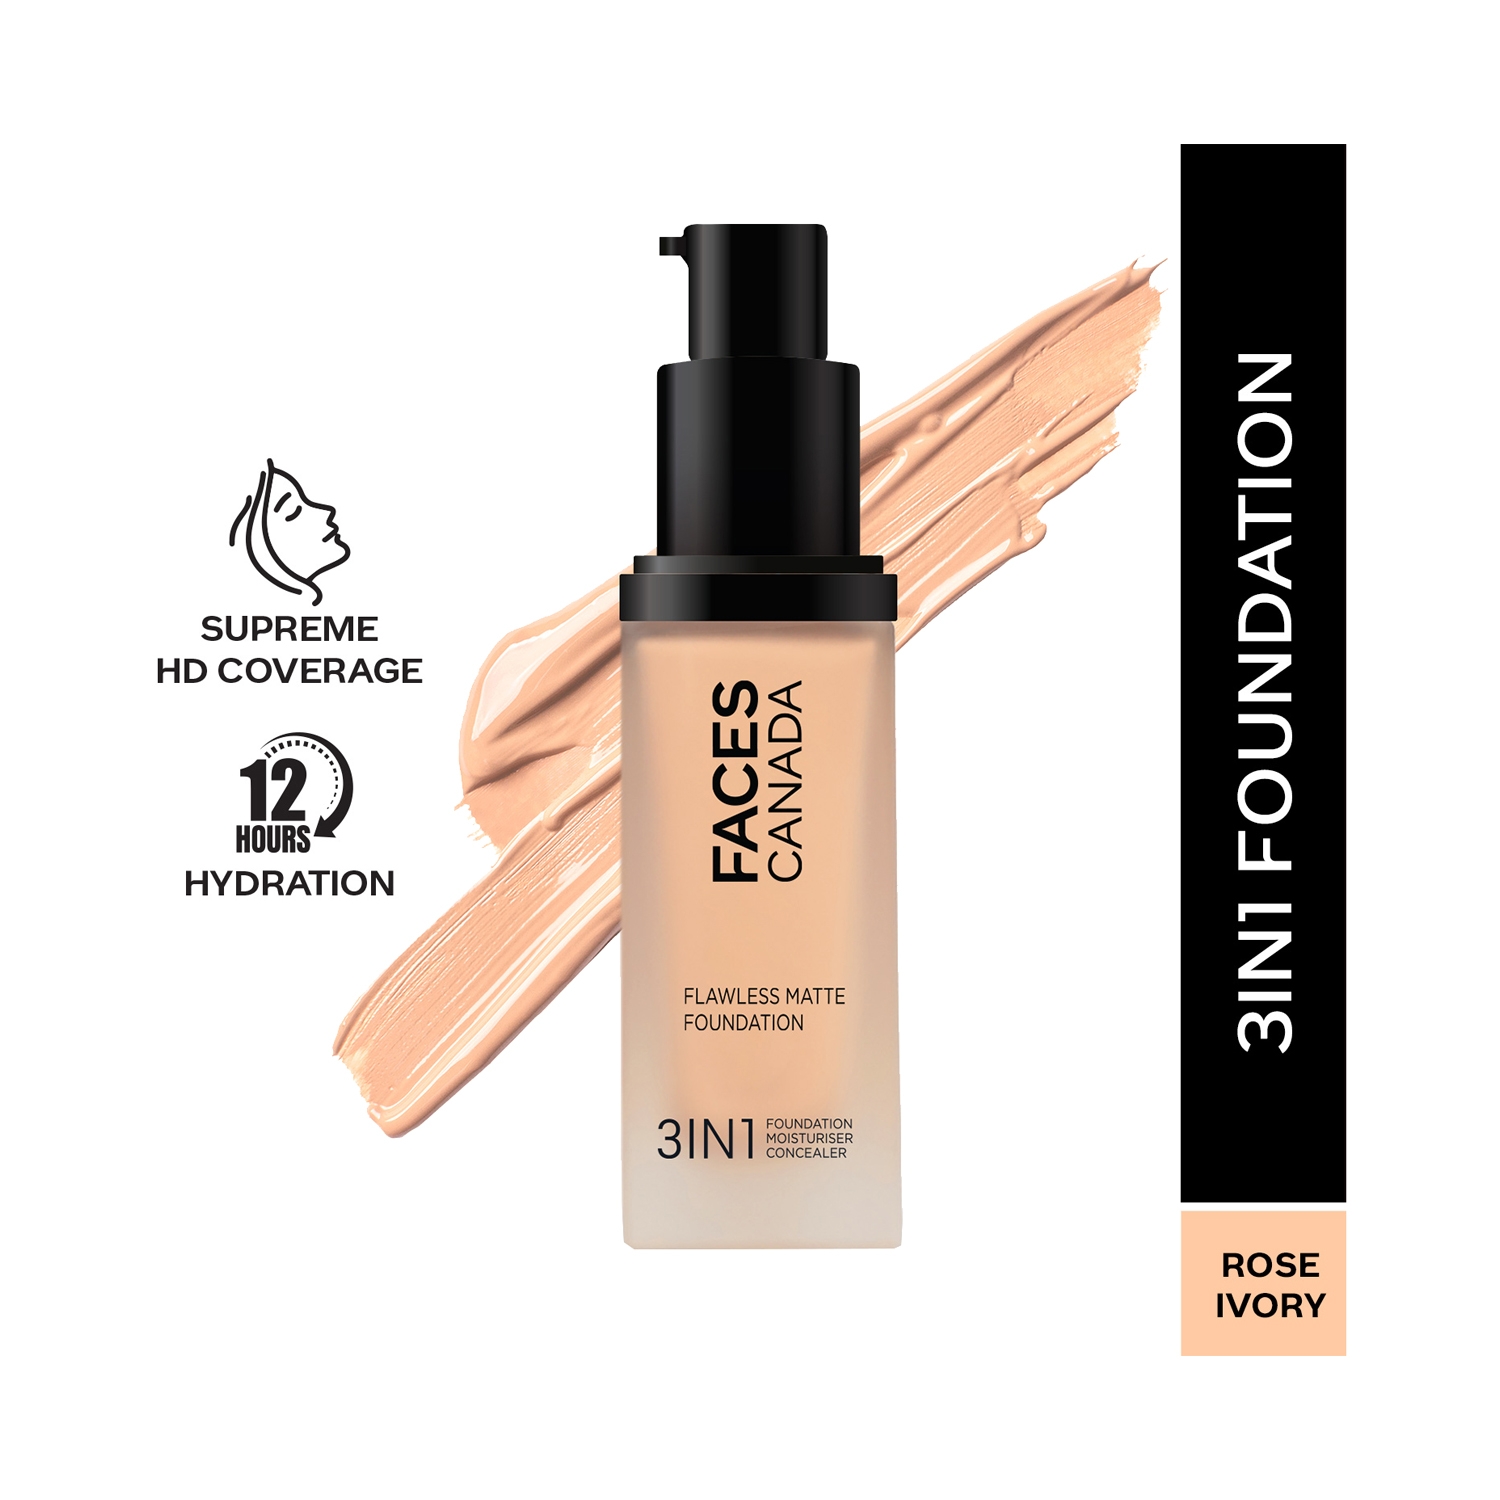 Faces Canada | Faces Canada 3-In-1 Flawless Matte Foundation SPF 18 - 011 Rose Ivory (30ml)